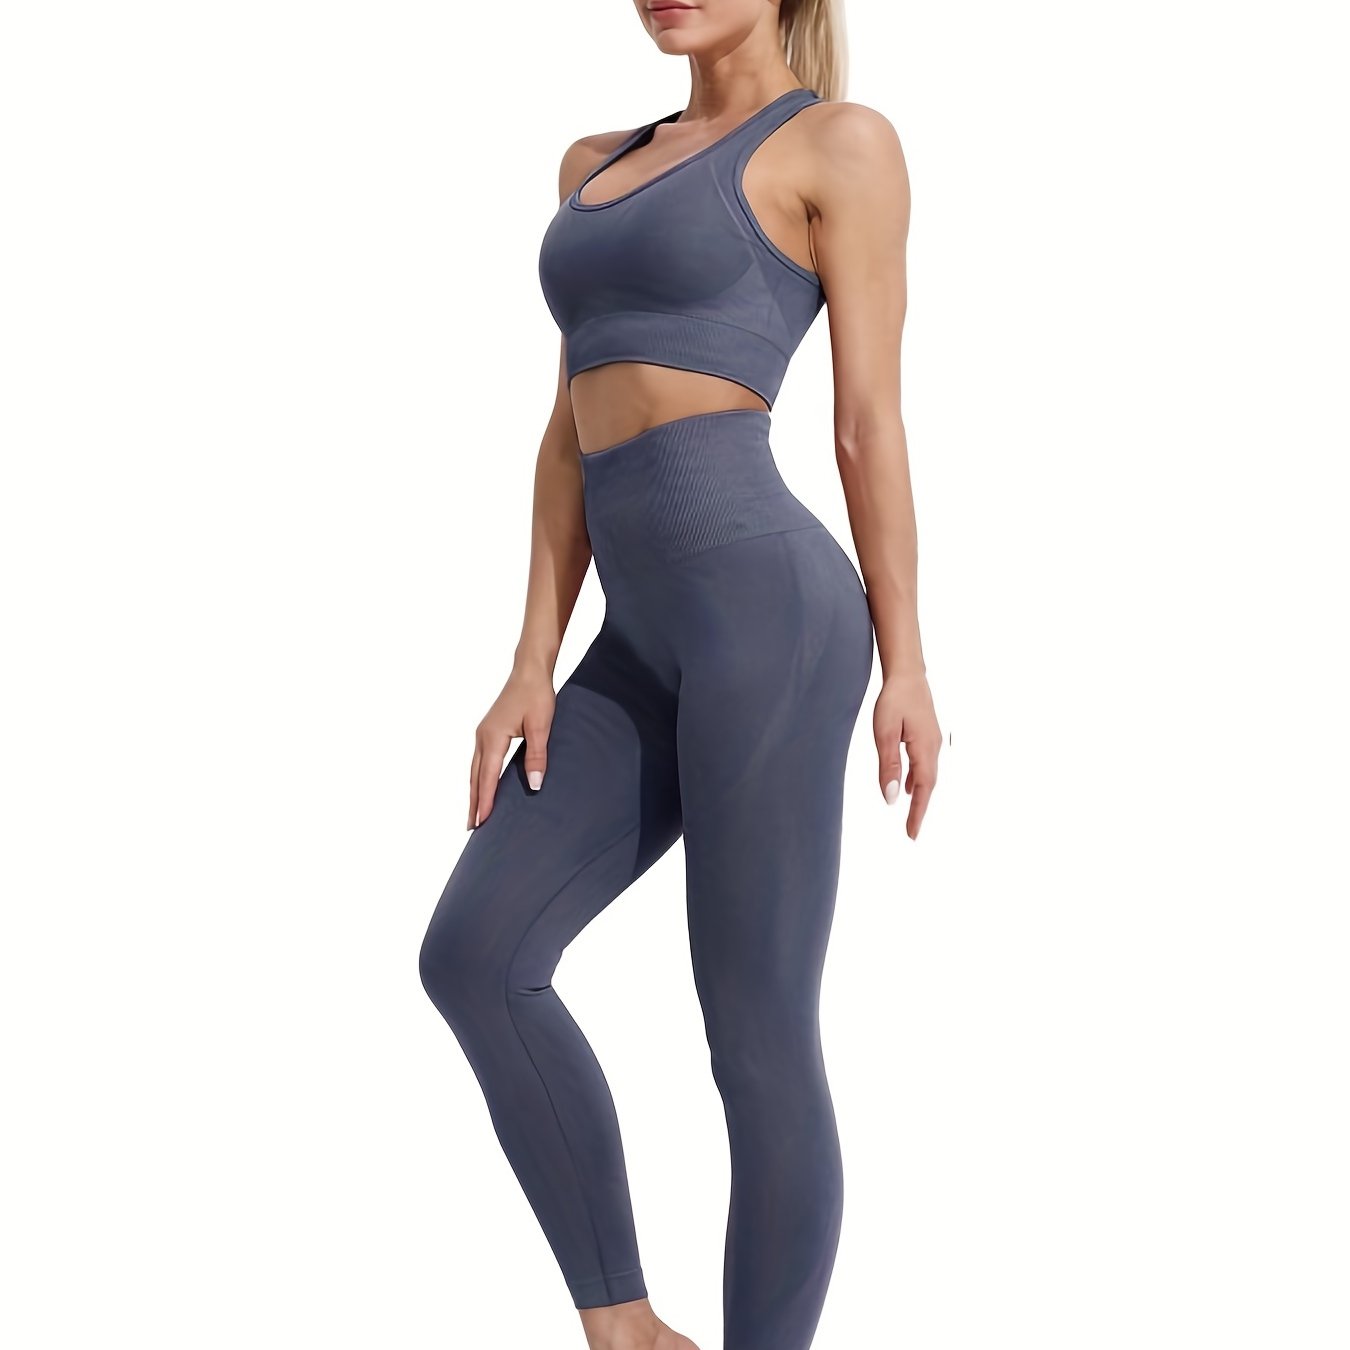 Cheap Women Yoga Sets Breathable Solid Vest+Leggings Pants Fitness Running  Clothes Sexy Gym Top Sportswear